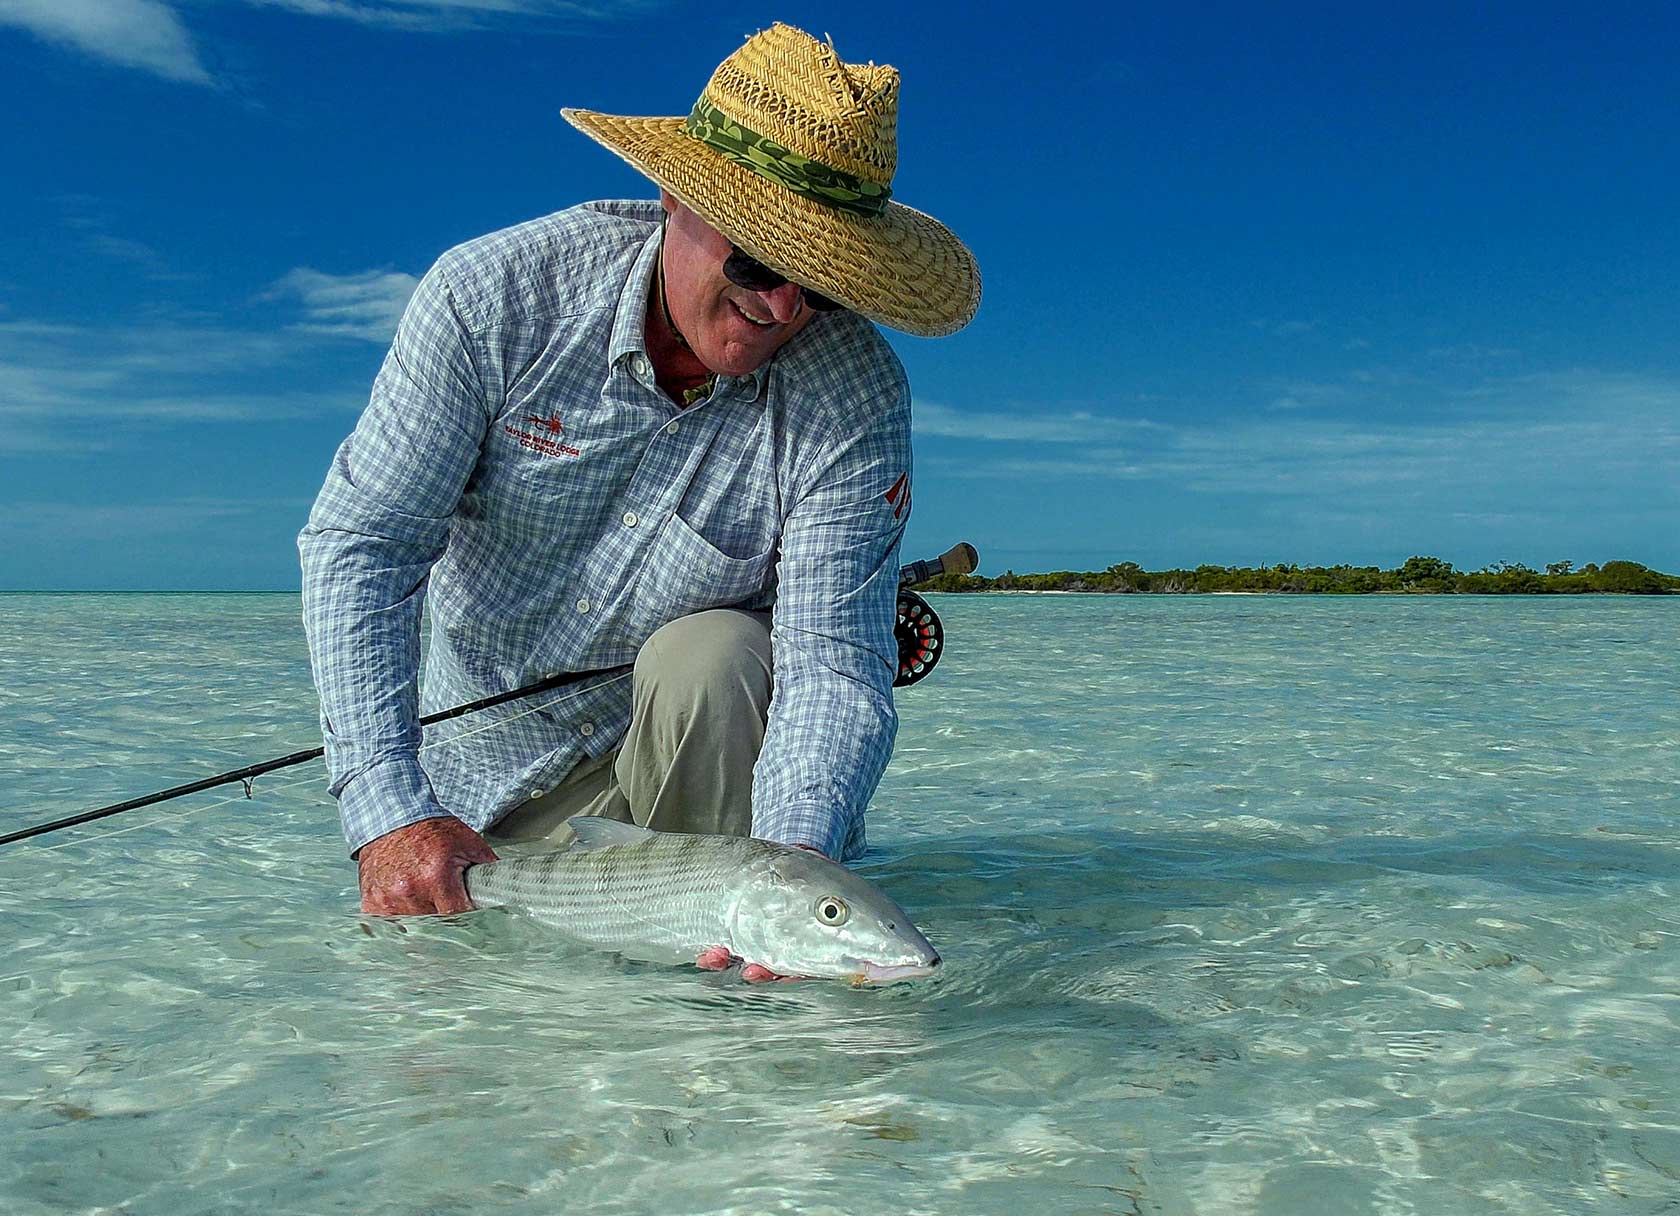 Brian O'Keefe fishing near Andros, Bahamas on saltwater angling adventure